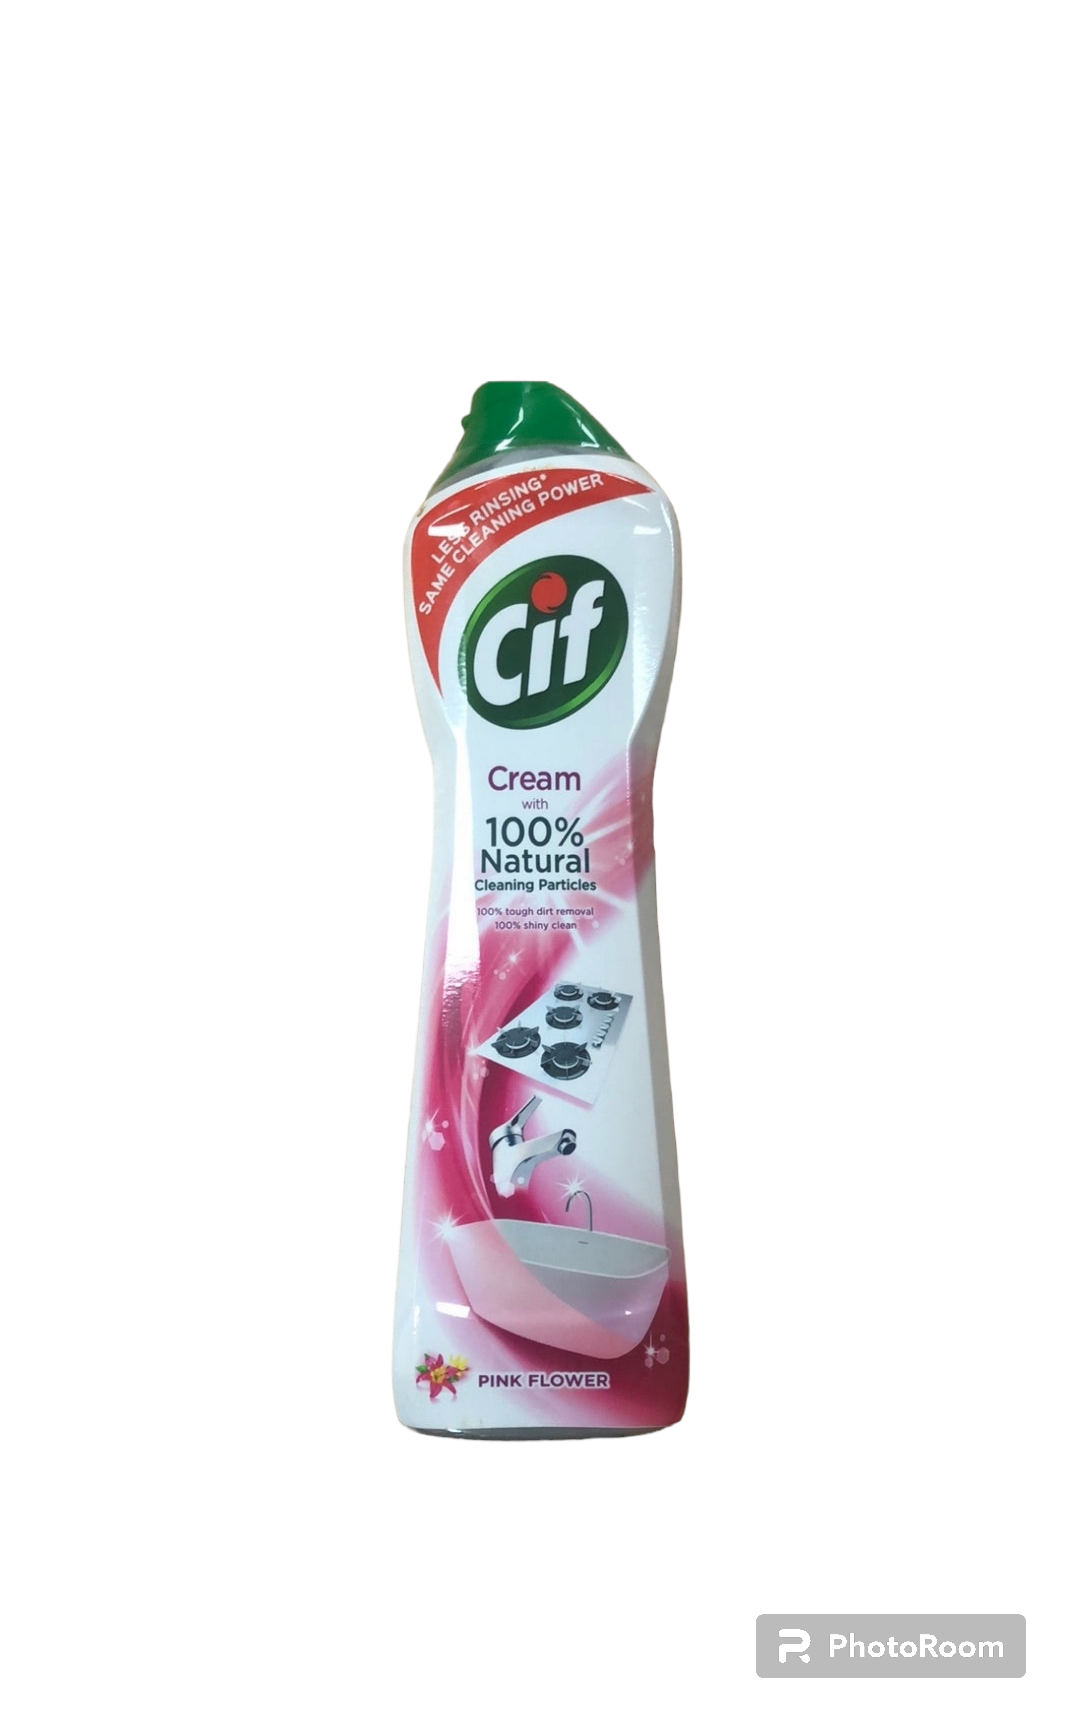 Cif cream cleaner 100% natural